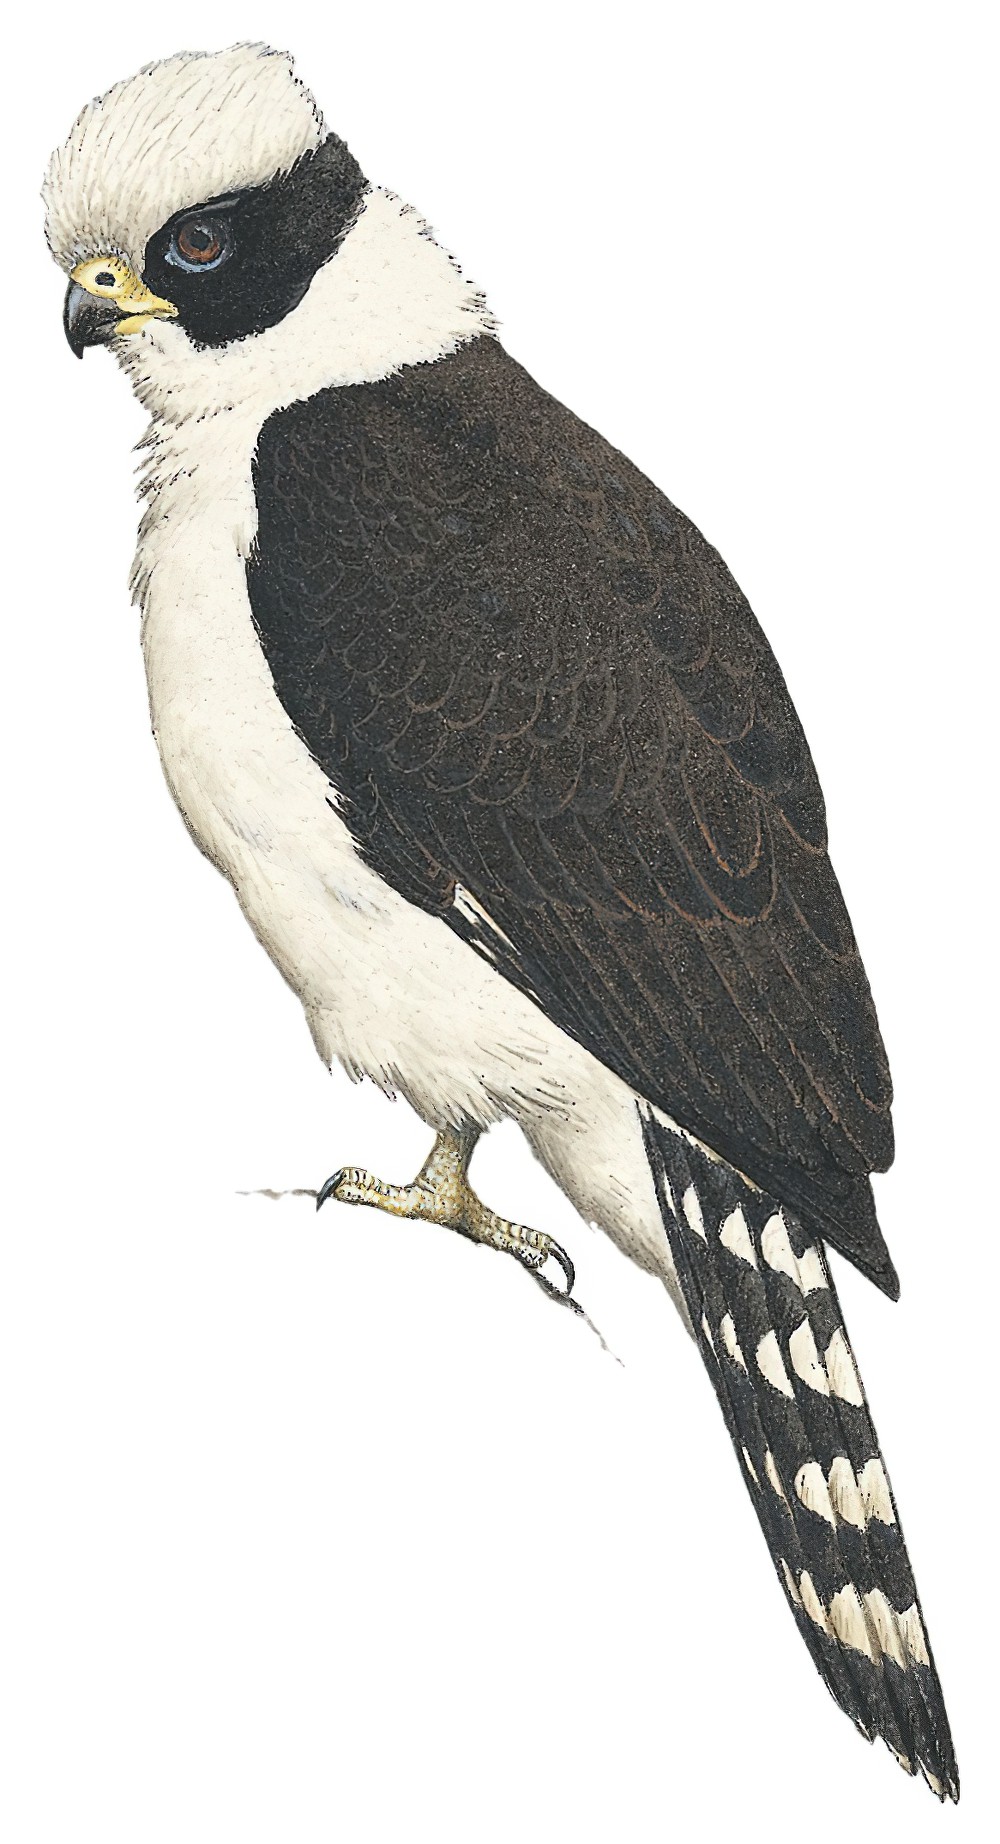 Laughing Falcon / Herpetotheres cachinnans